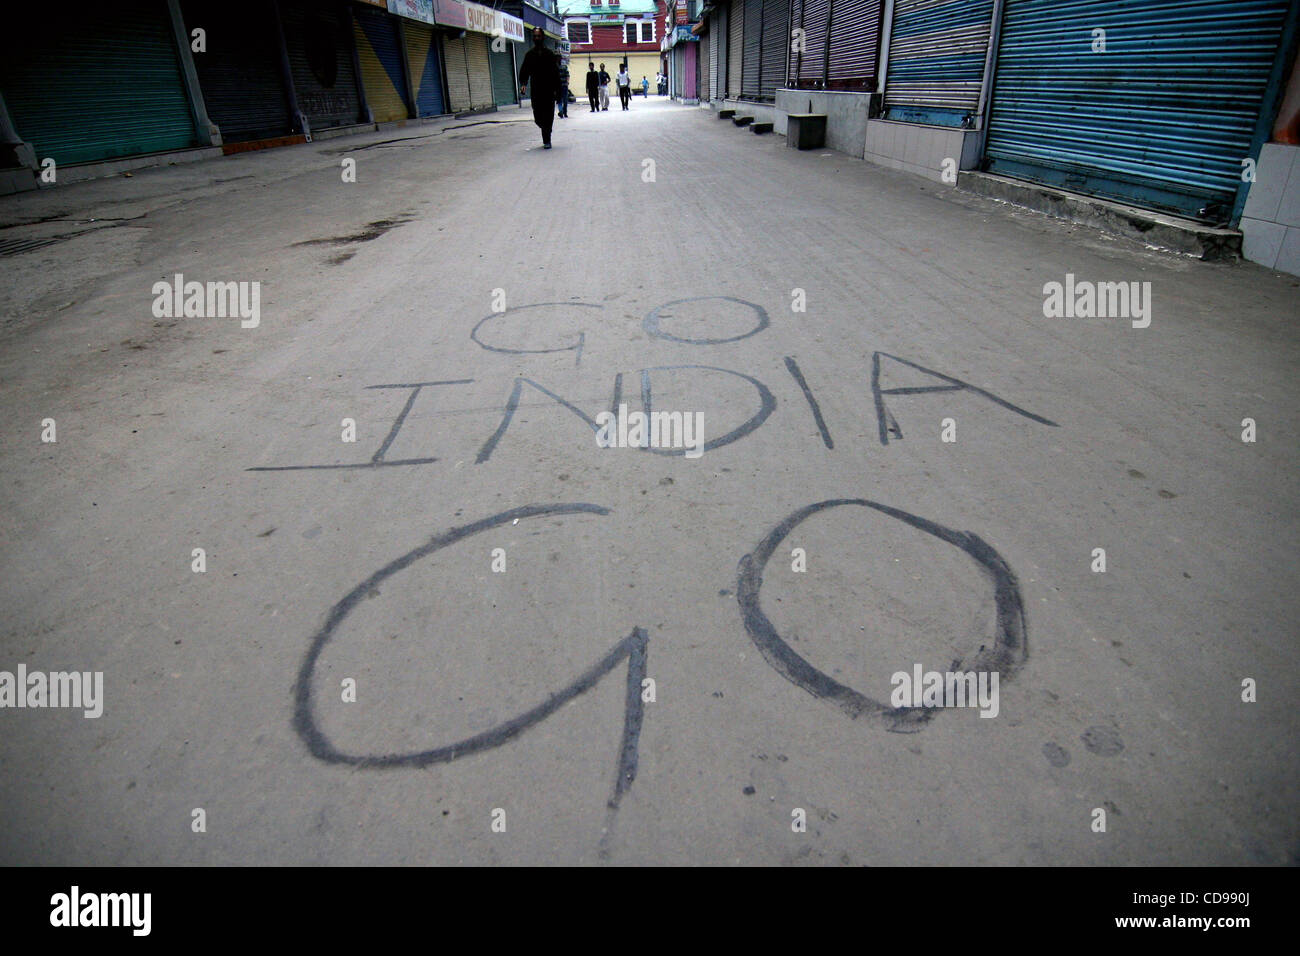 A kashmiri muslim walks past a deserted street in Srinagar, the summer capital of Indian  Kashmir, as many people on Saturday, June 26, 2010 registered their protests against 'Indian Occupation' by displaying graffiti's on roads, electric poles and walls Photo/Altaf Zargar/Zuma Press Stock Photo